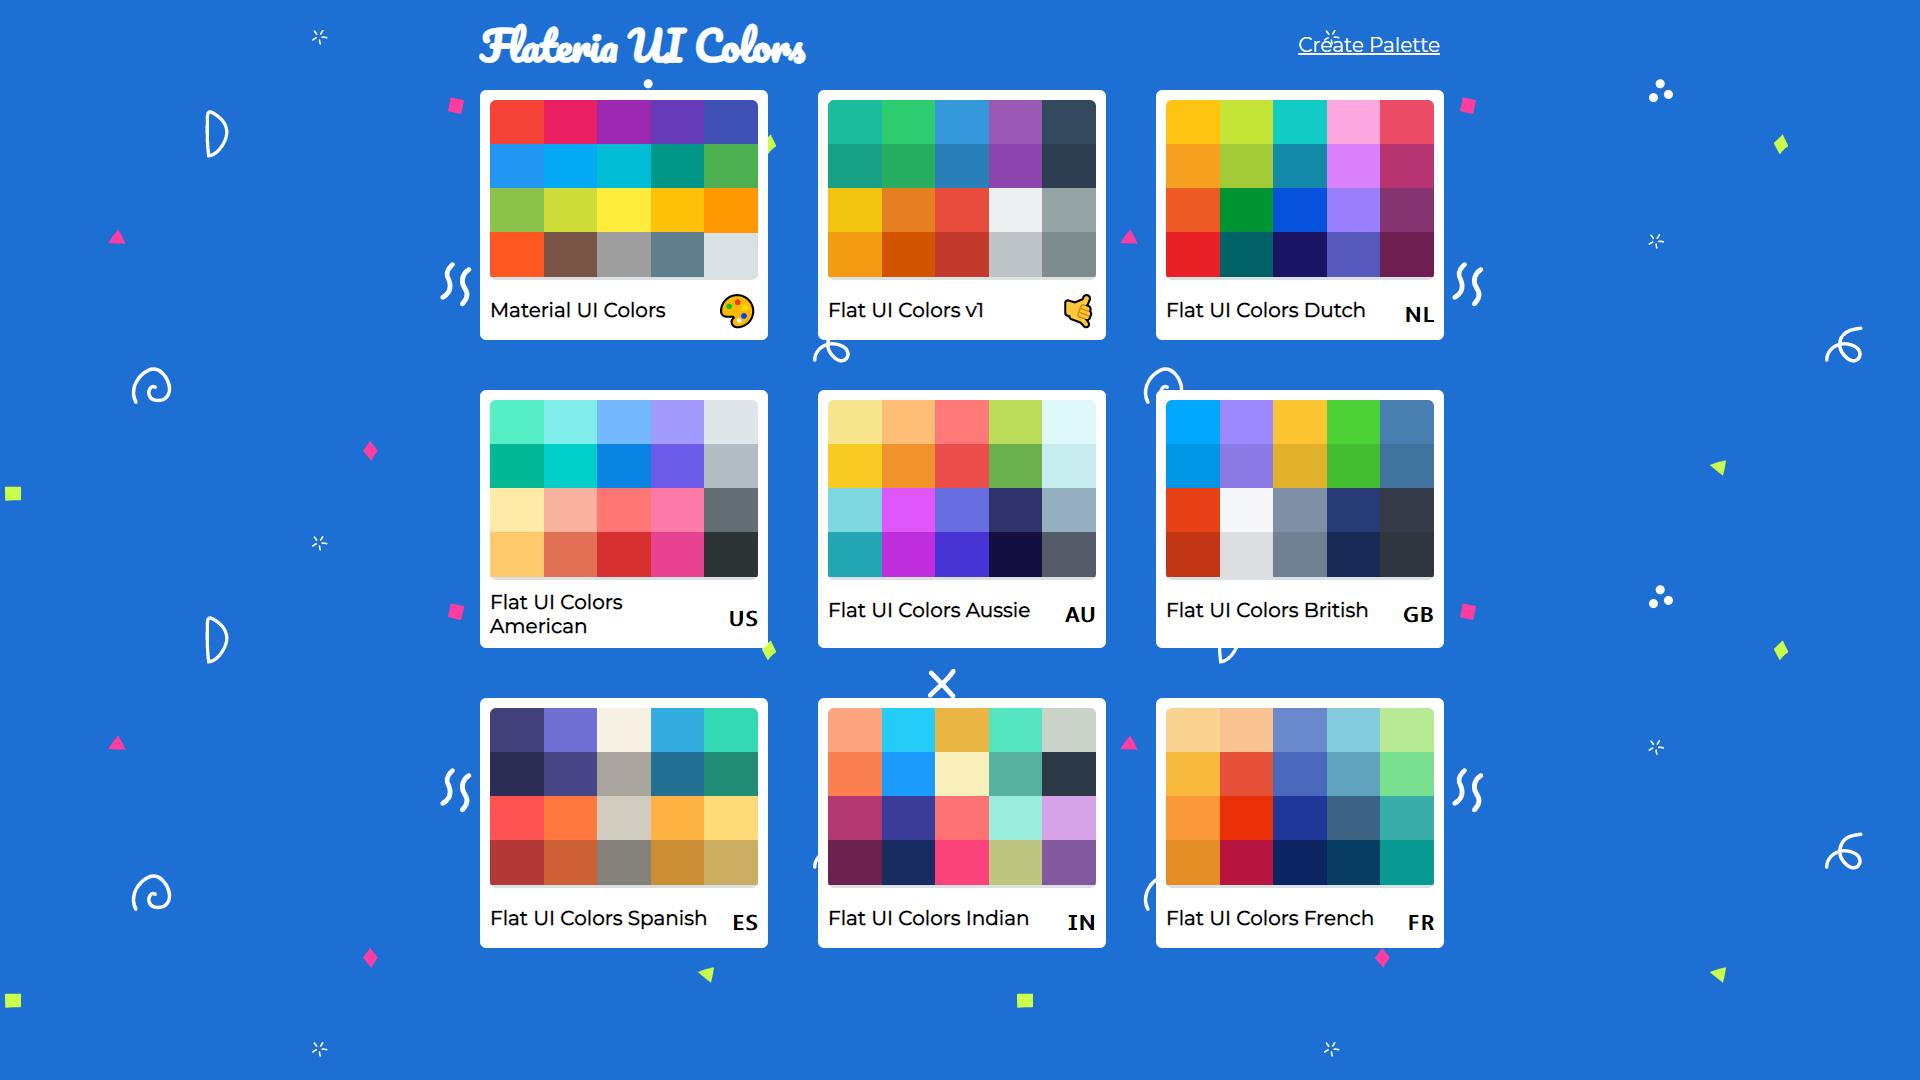 My Personal Project, This app let you create your own color palette